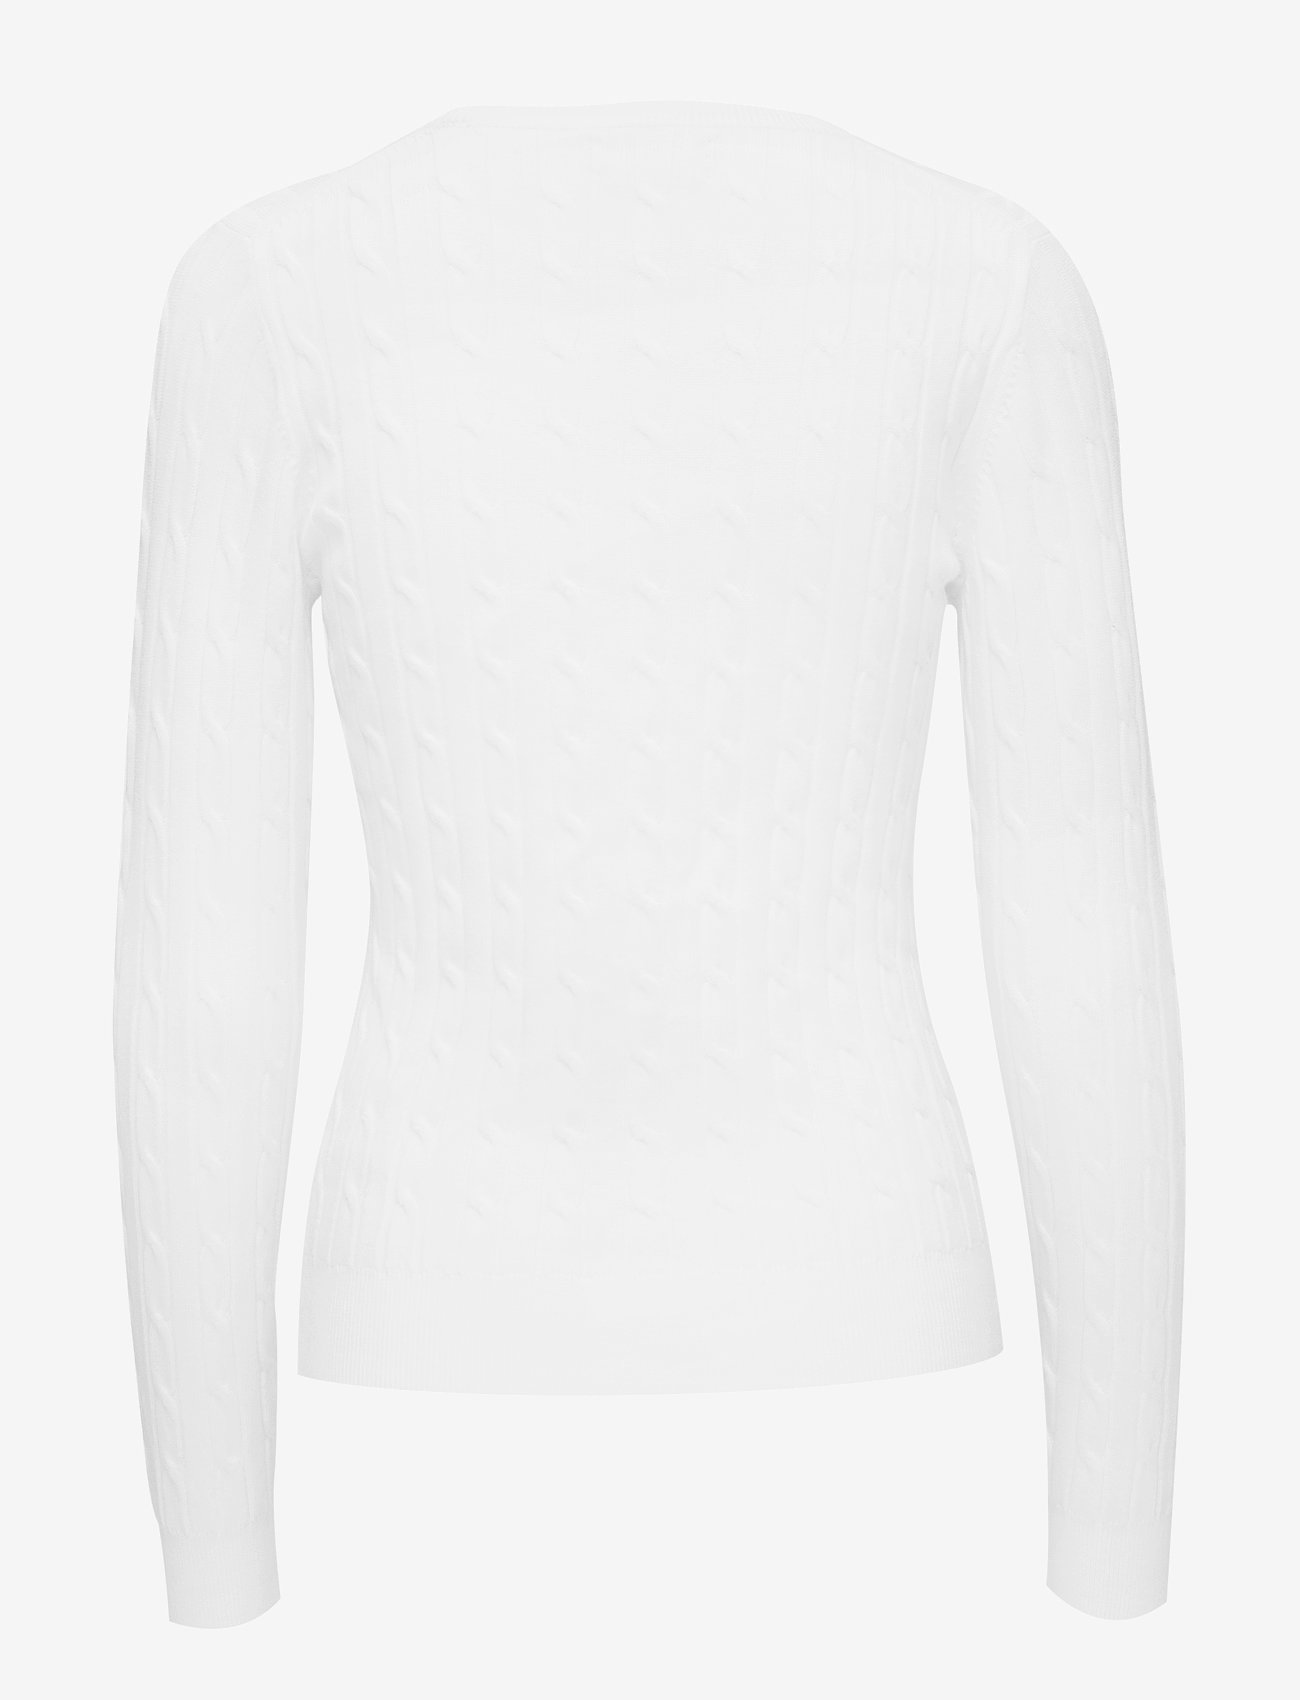 GANT - STRETCH COTTON CABLE C-NECK - jumpers - eggshell - 1